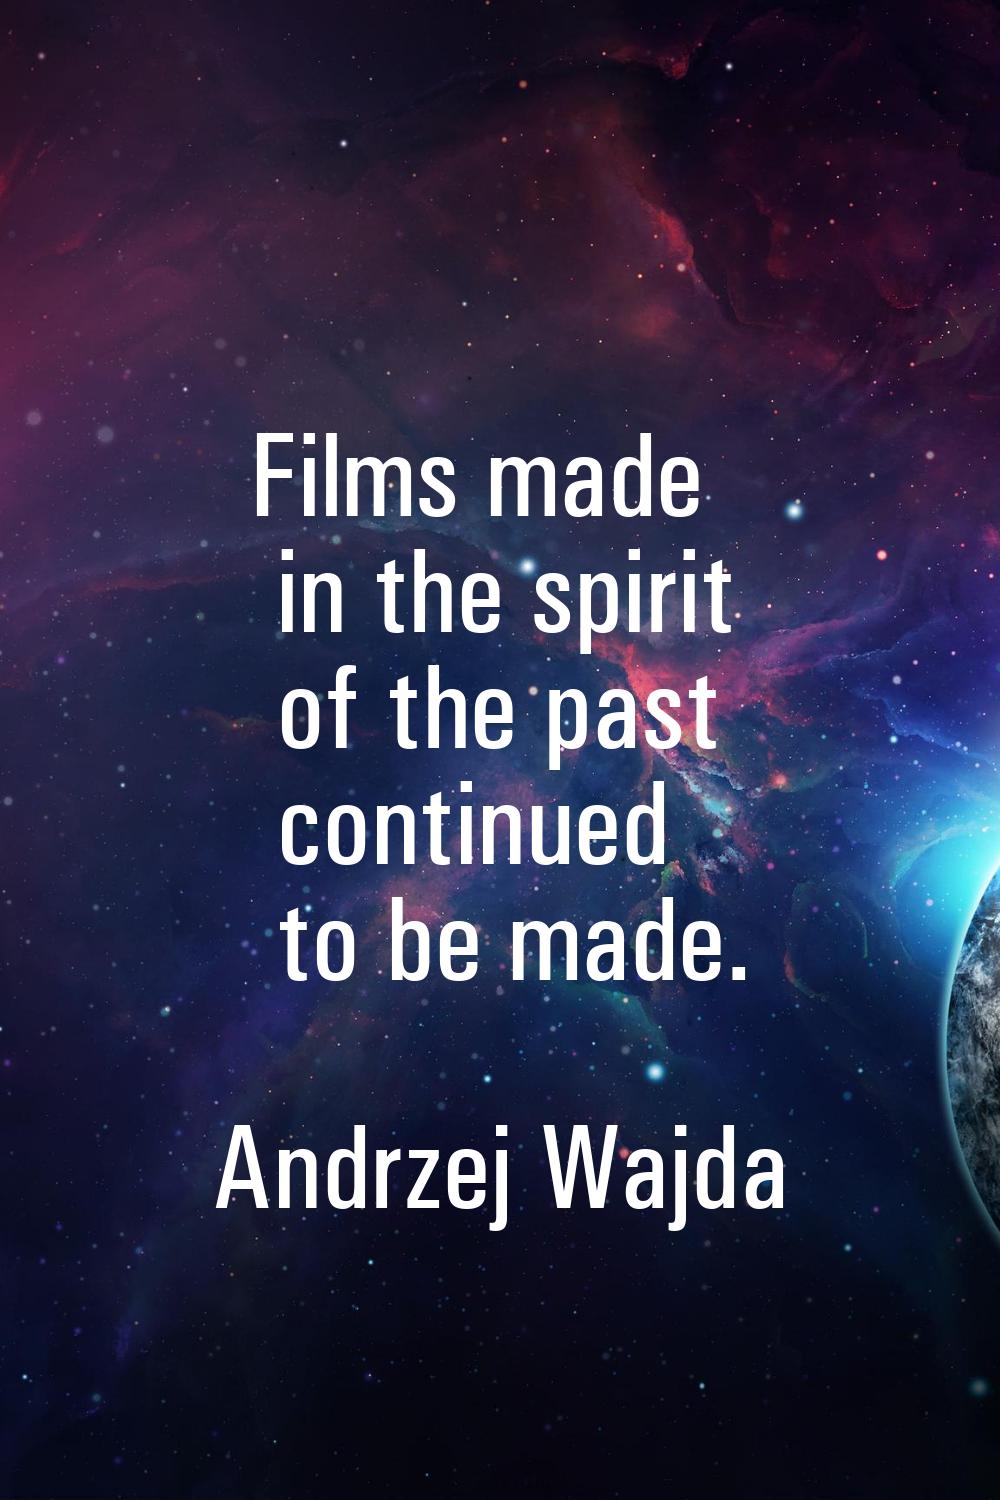 Films made in the spirit of the past continued to be made.